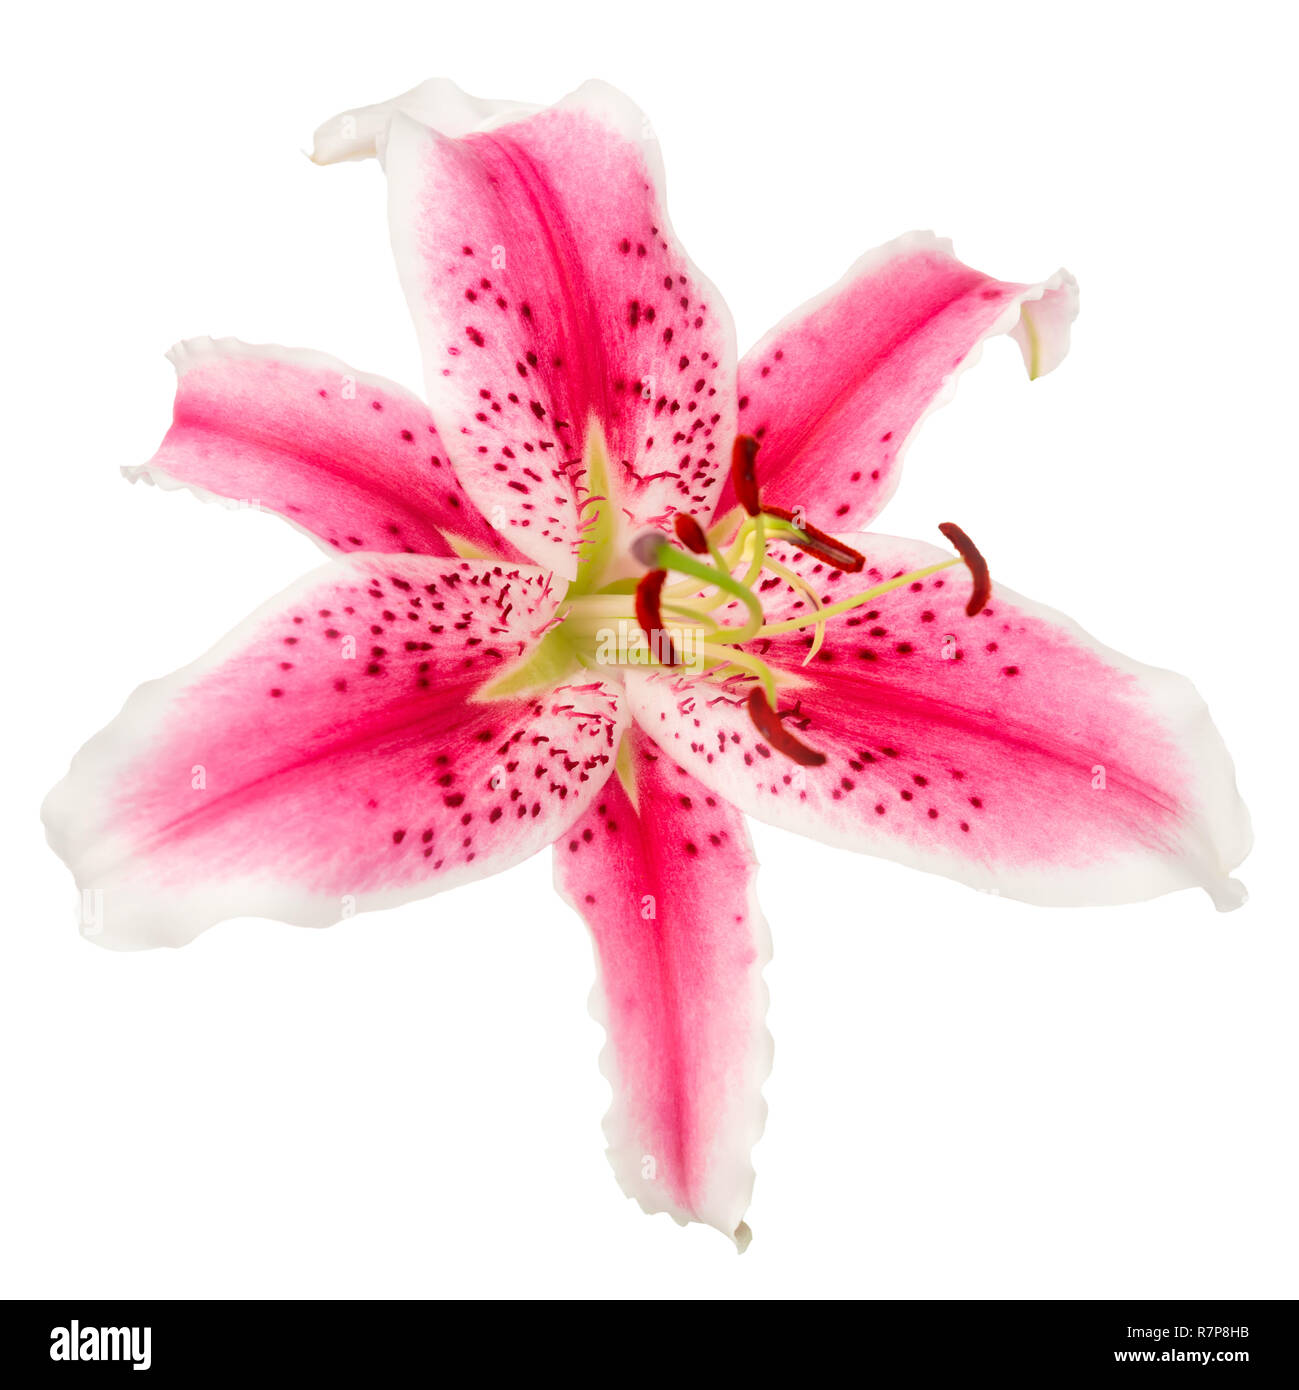 beautiful red with spotted lily flower isolated on white background ...